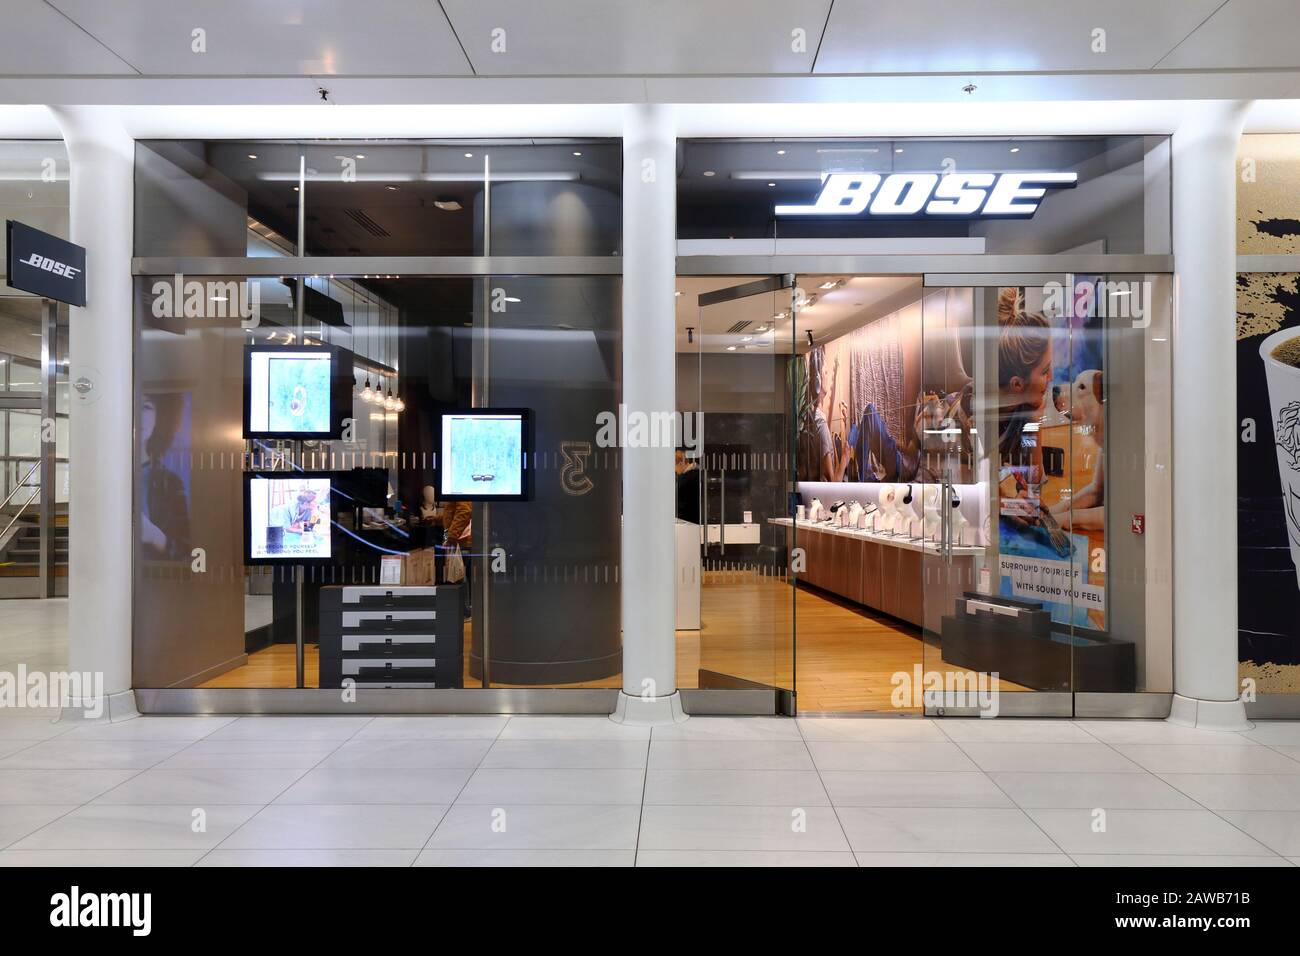 A Bose headphone and speaker store in the World Trade Center Oculus shopping mall in New York, NY. Stock Photo